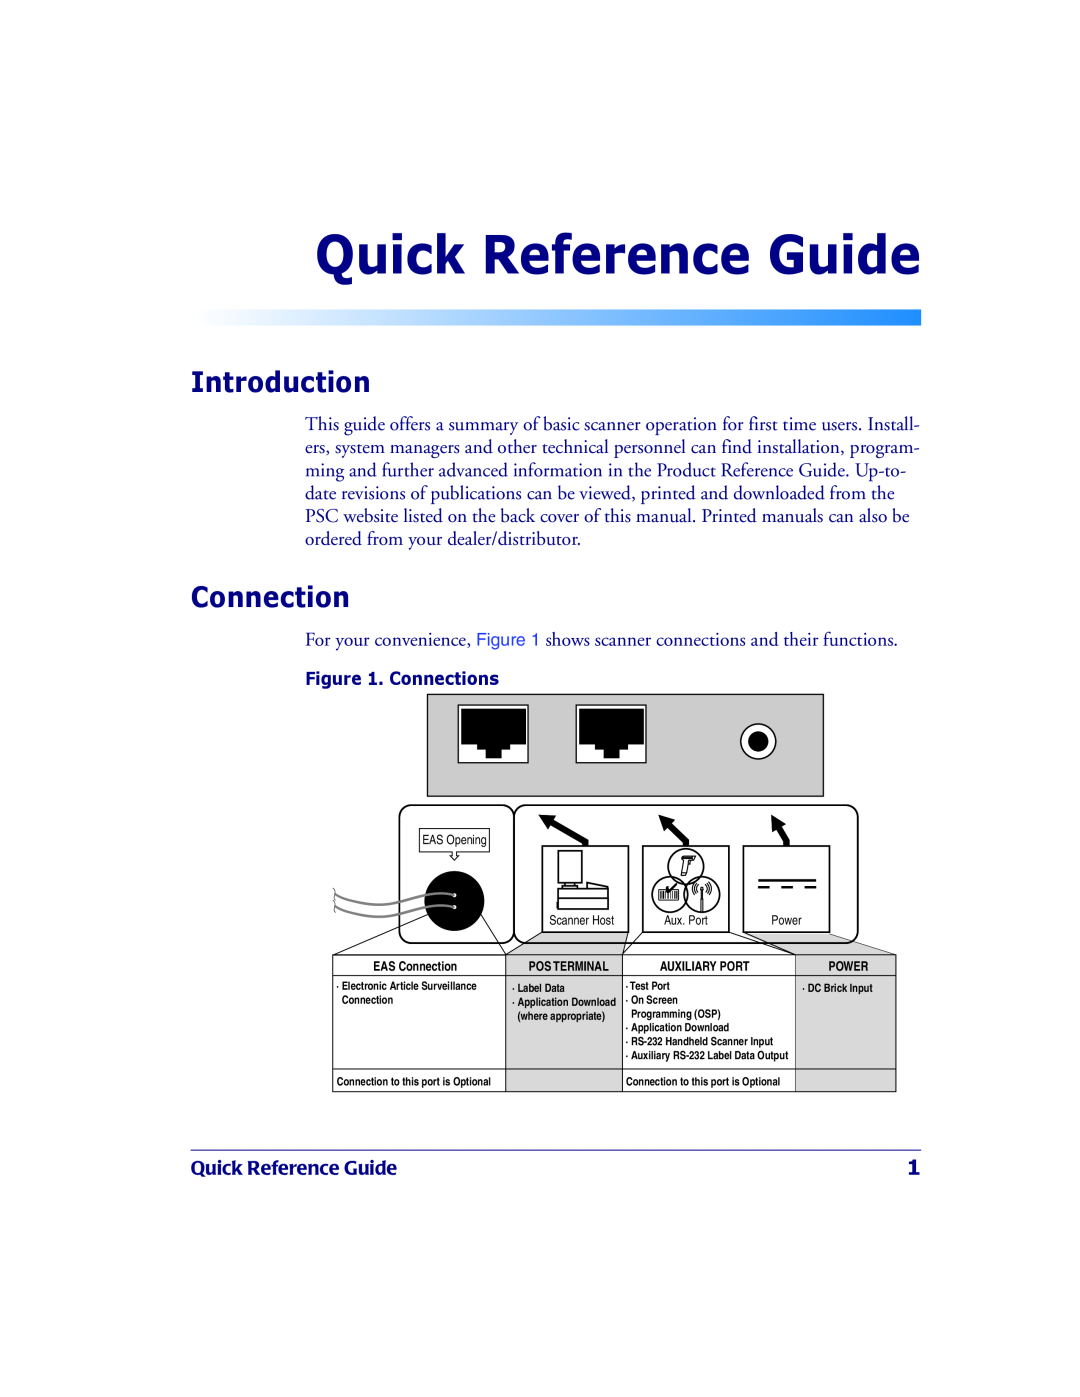 PSC 2200VS manual Quick Reference Guide, Introduction, Connection 